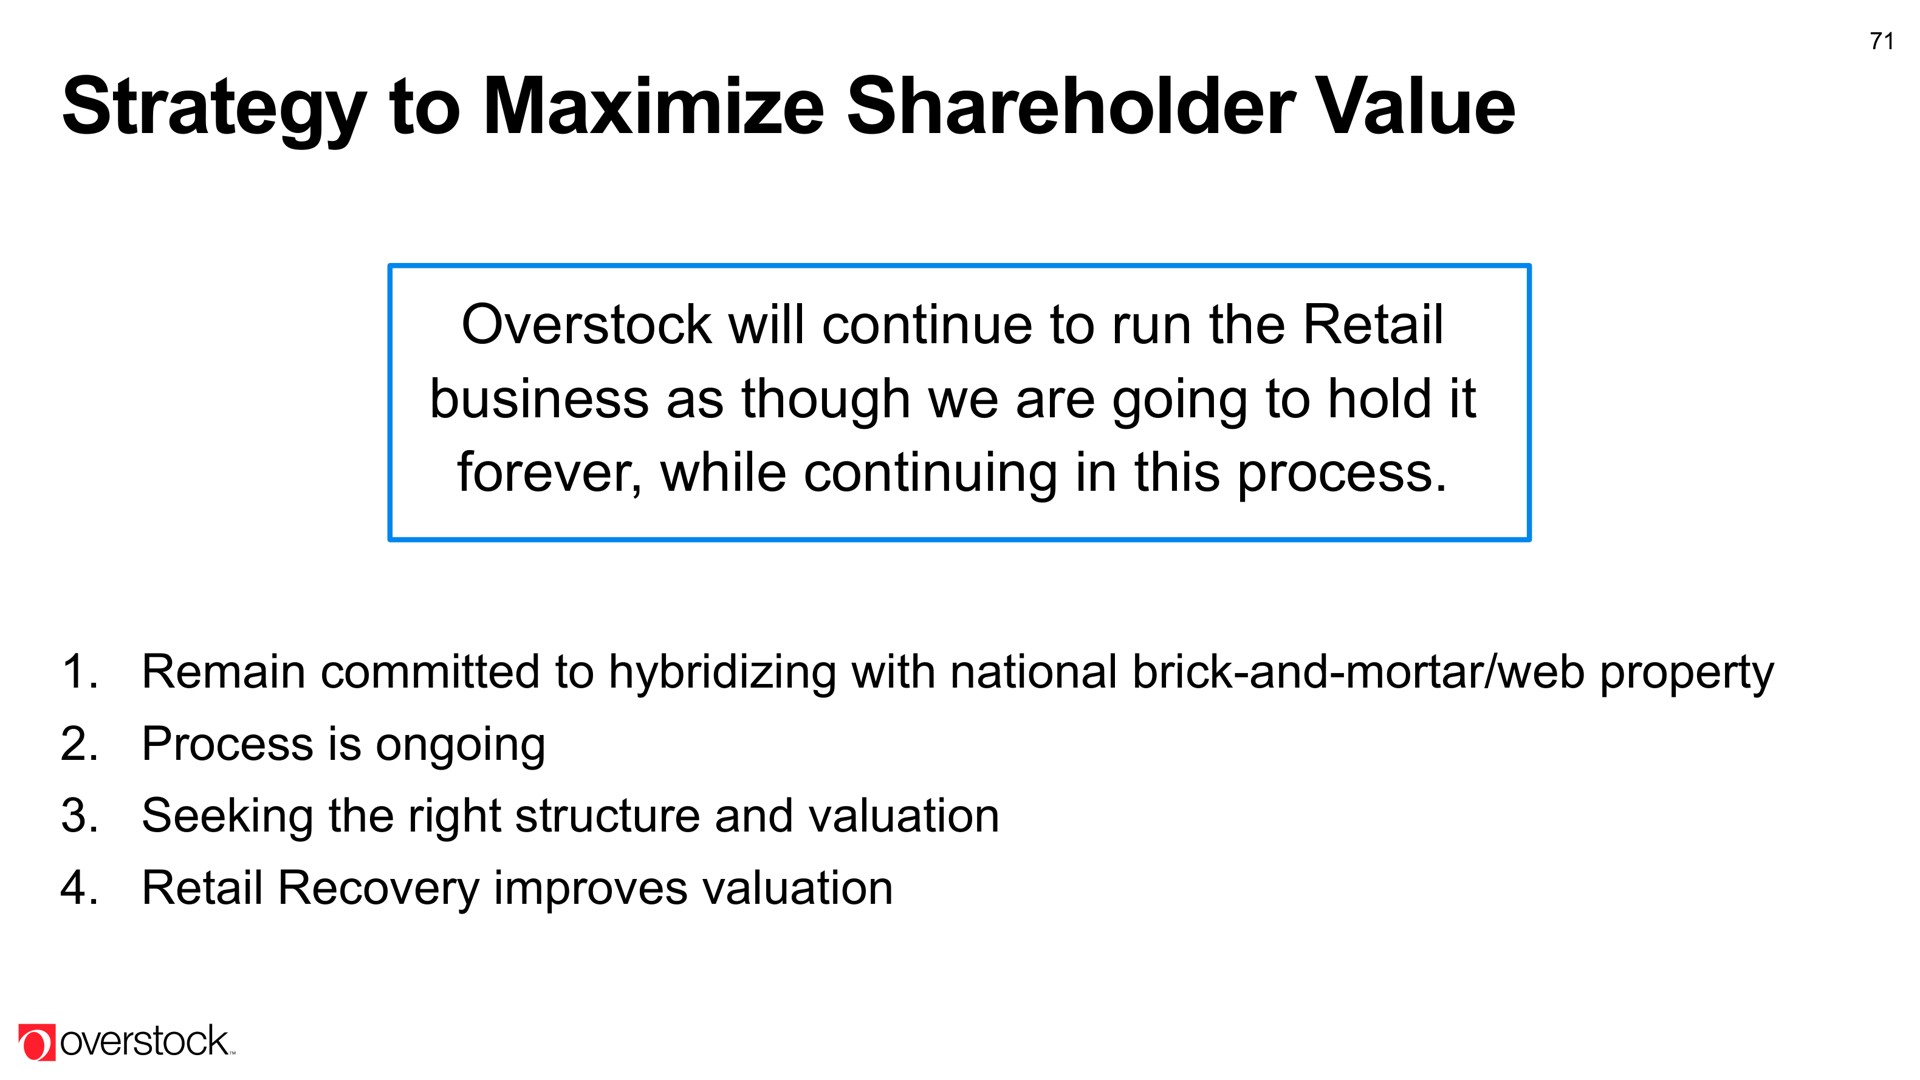 strategy to maximize shareholder value | Overstock